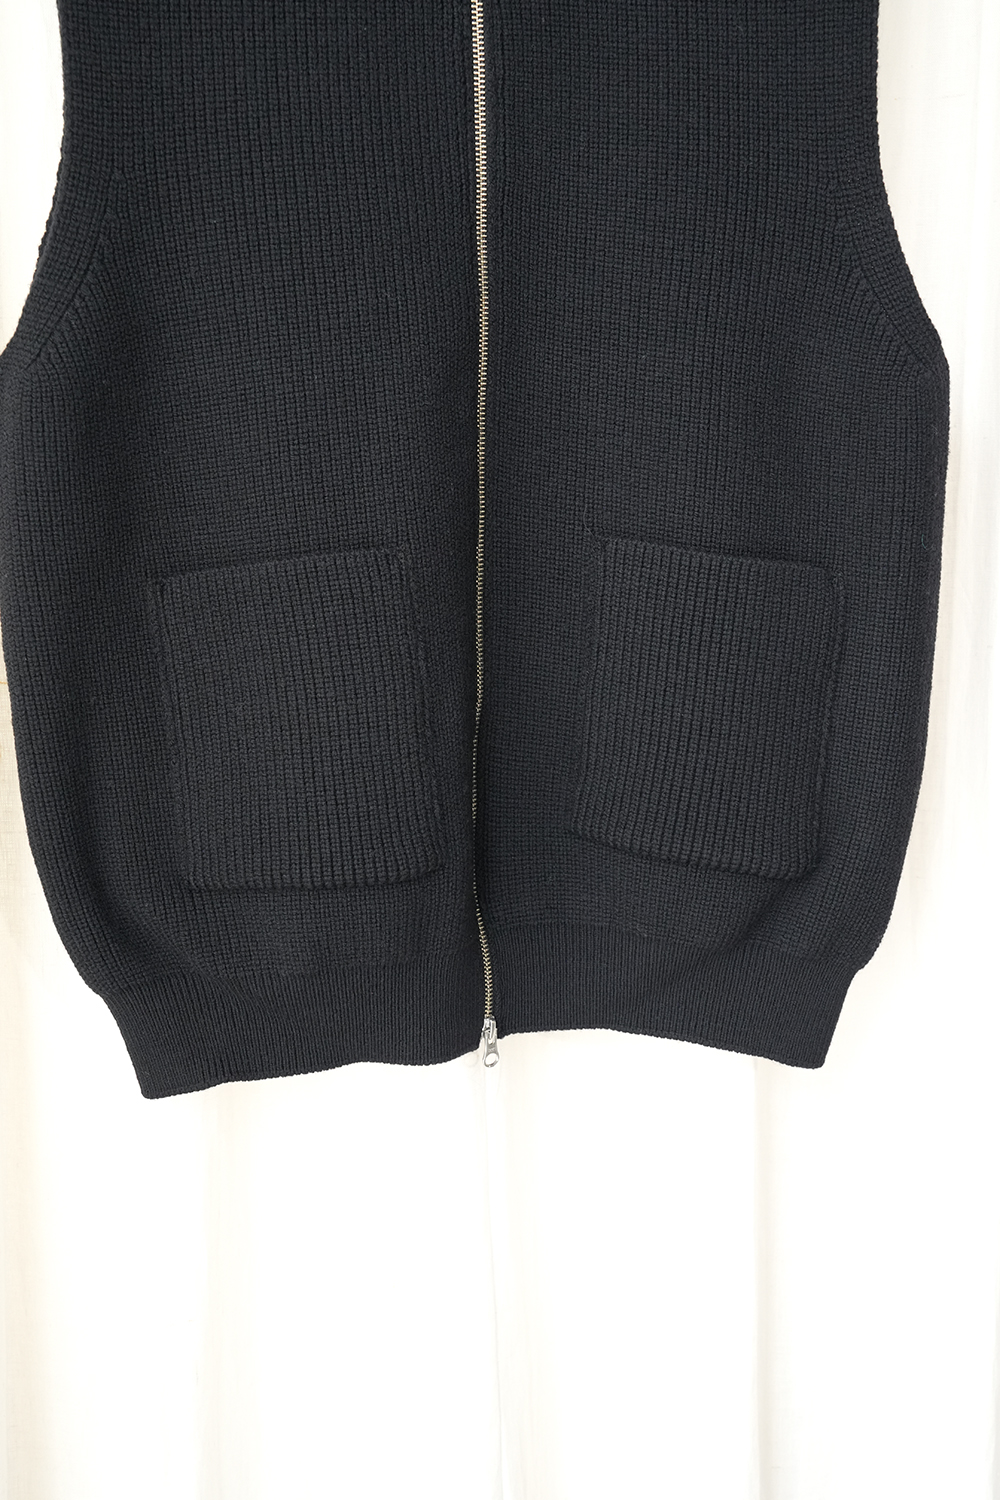 Mulesing Free Wool Knit Zip Vest | ANOTHER LOUNGE